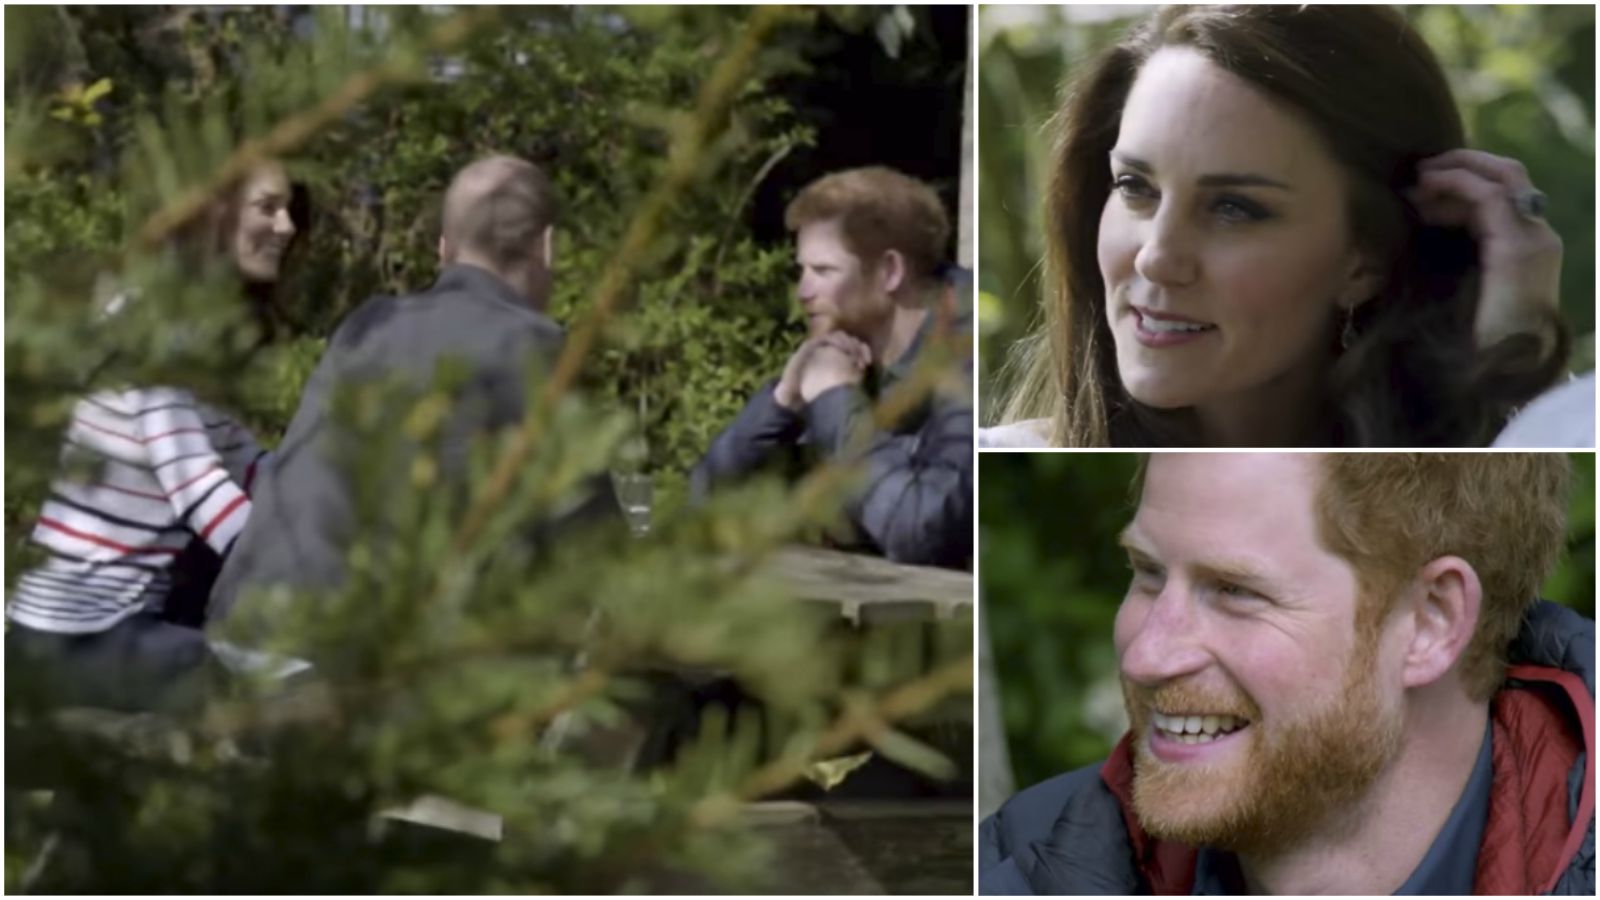 Royal Family Have a Conversation While Sitting at a Picnic Table. A Camera Captured It All…